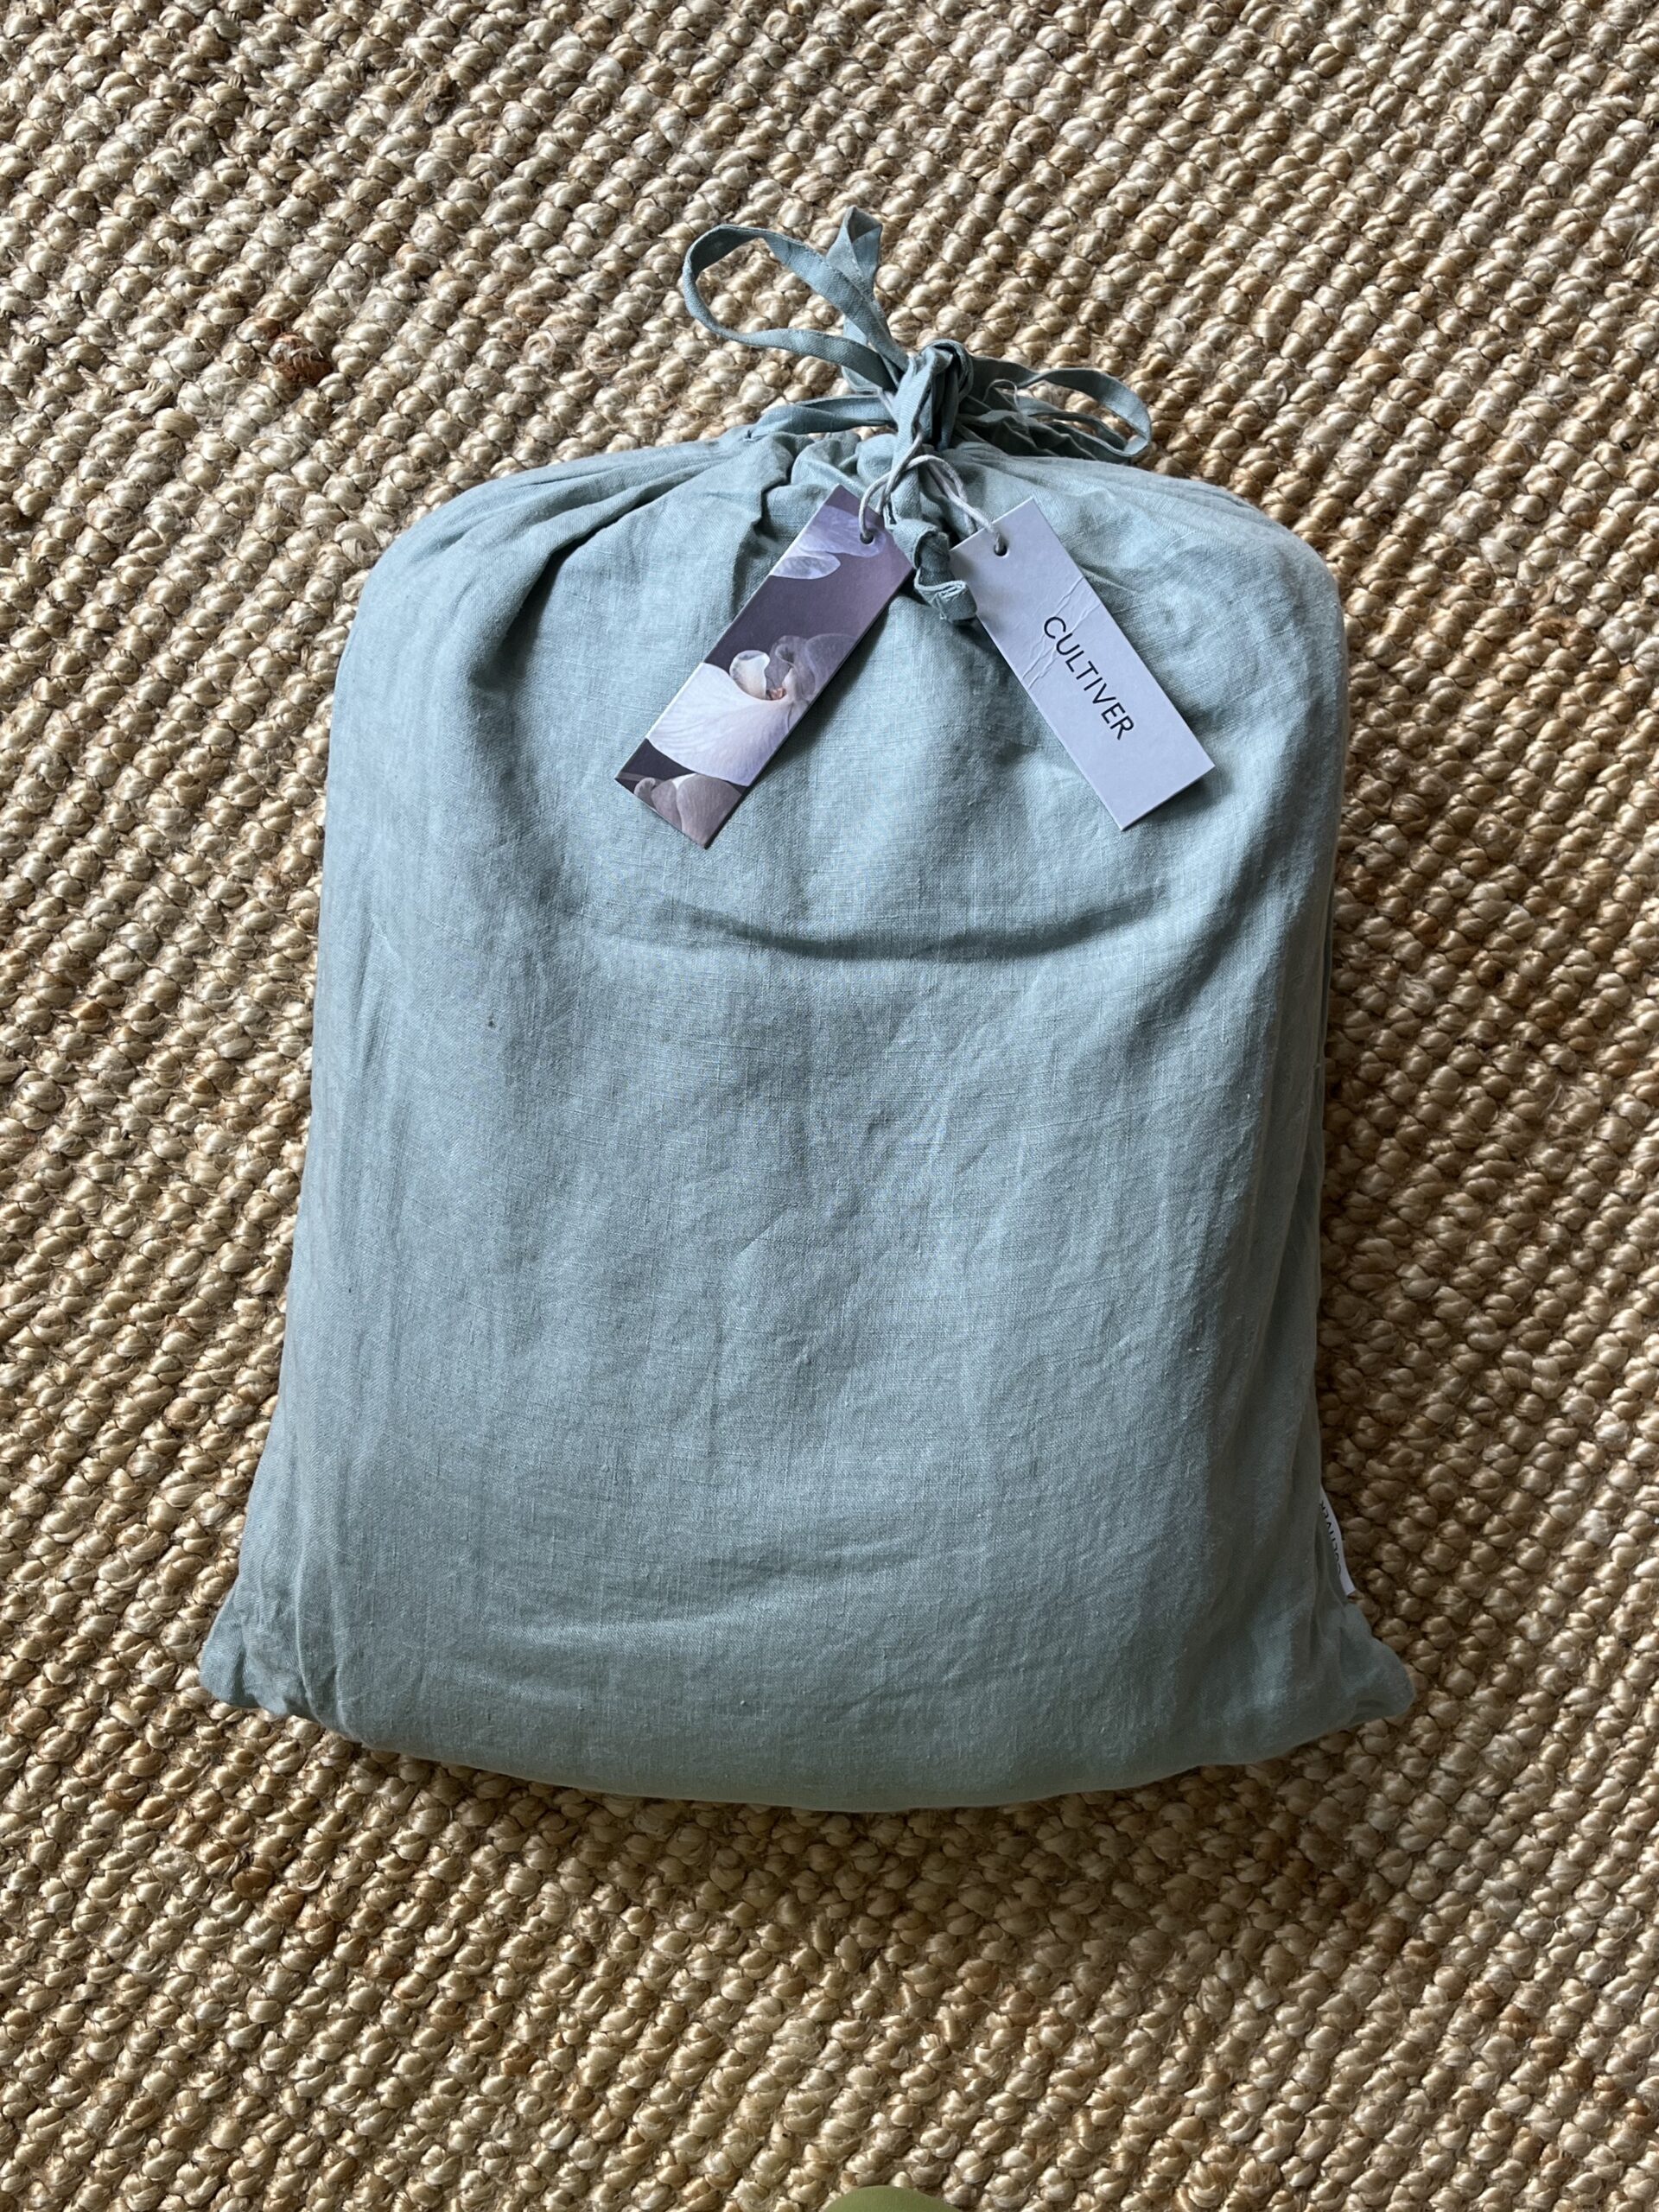 A light green fabric bag tied with a string, labeled "Cultiver," placed on a woven jute rug.